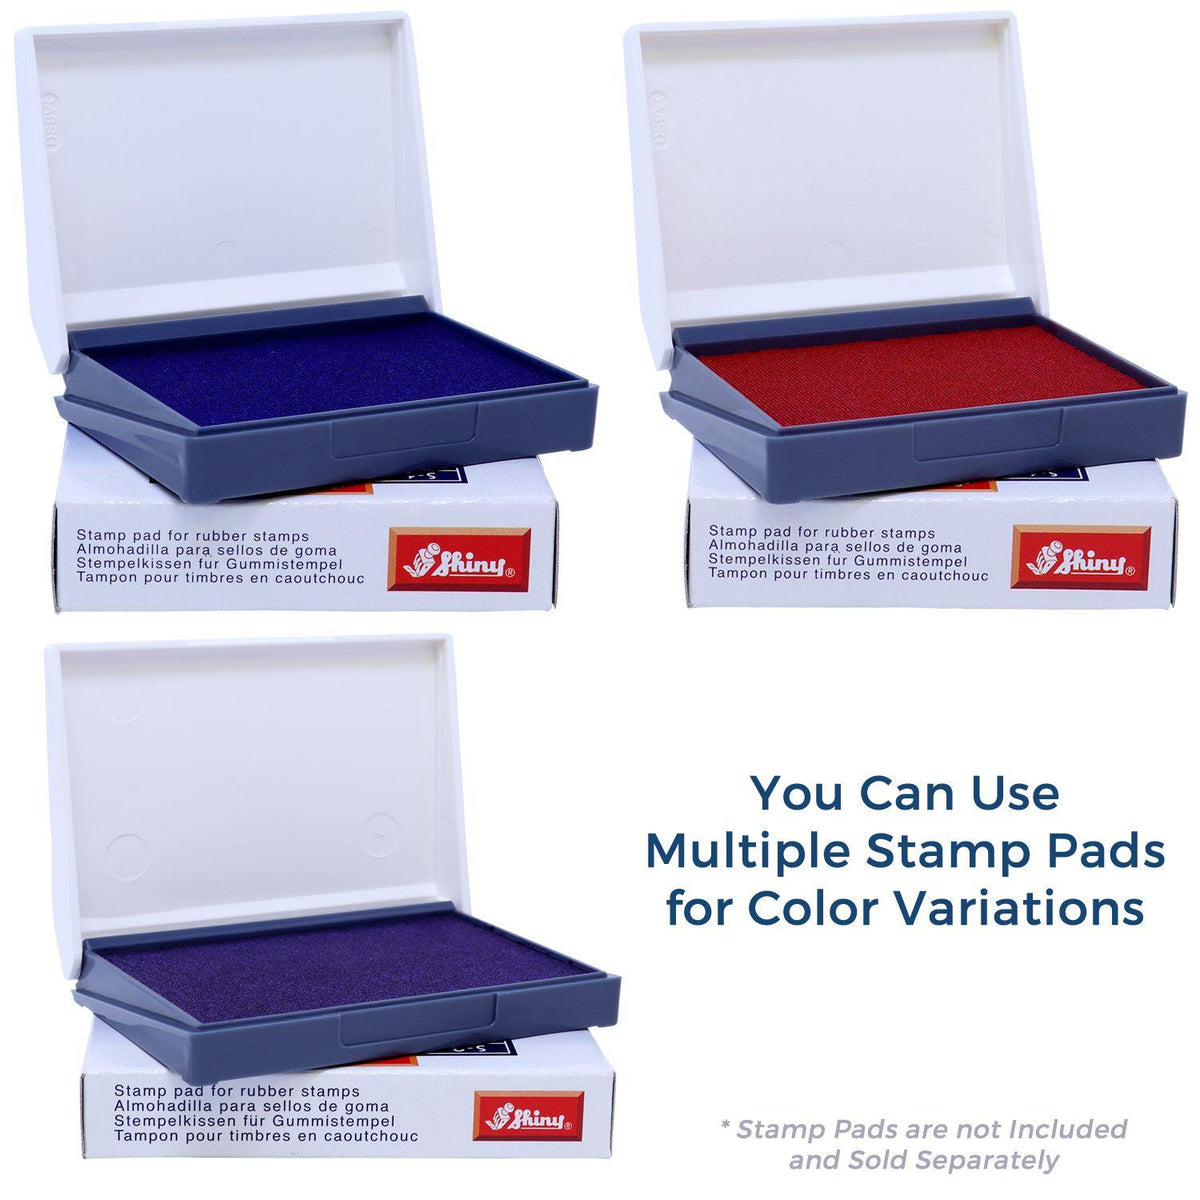 Stamp Pads for Large E-Mail Rubber Stamp Available